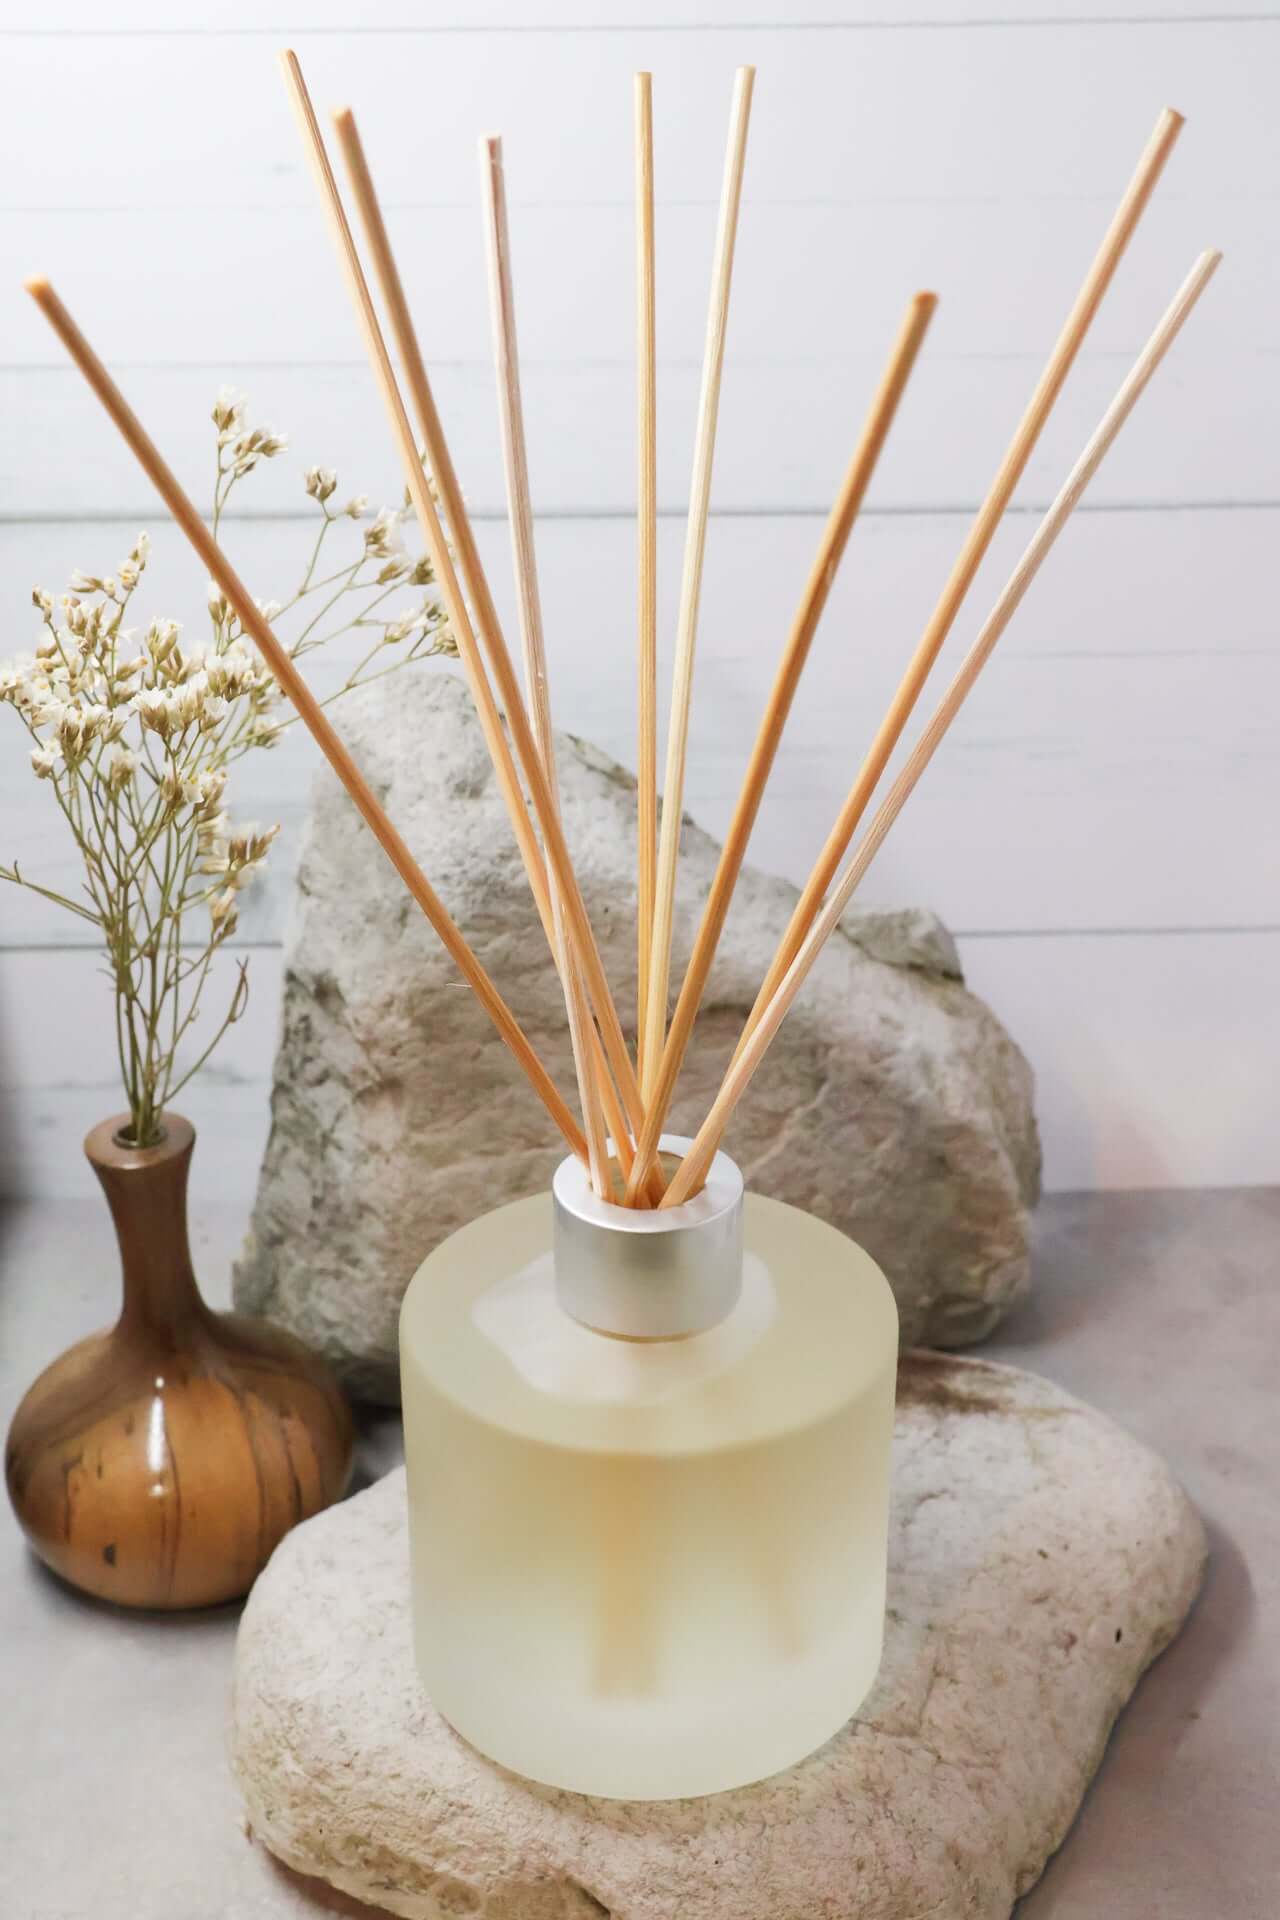 Crystal infused diffuser with wicks of the fragrance Sea Salt and Driftwood